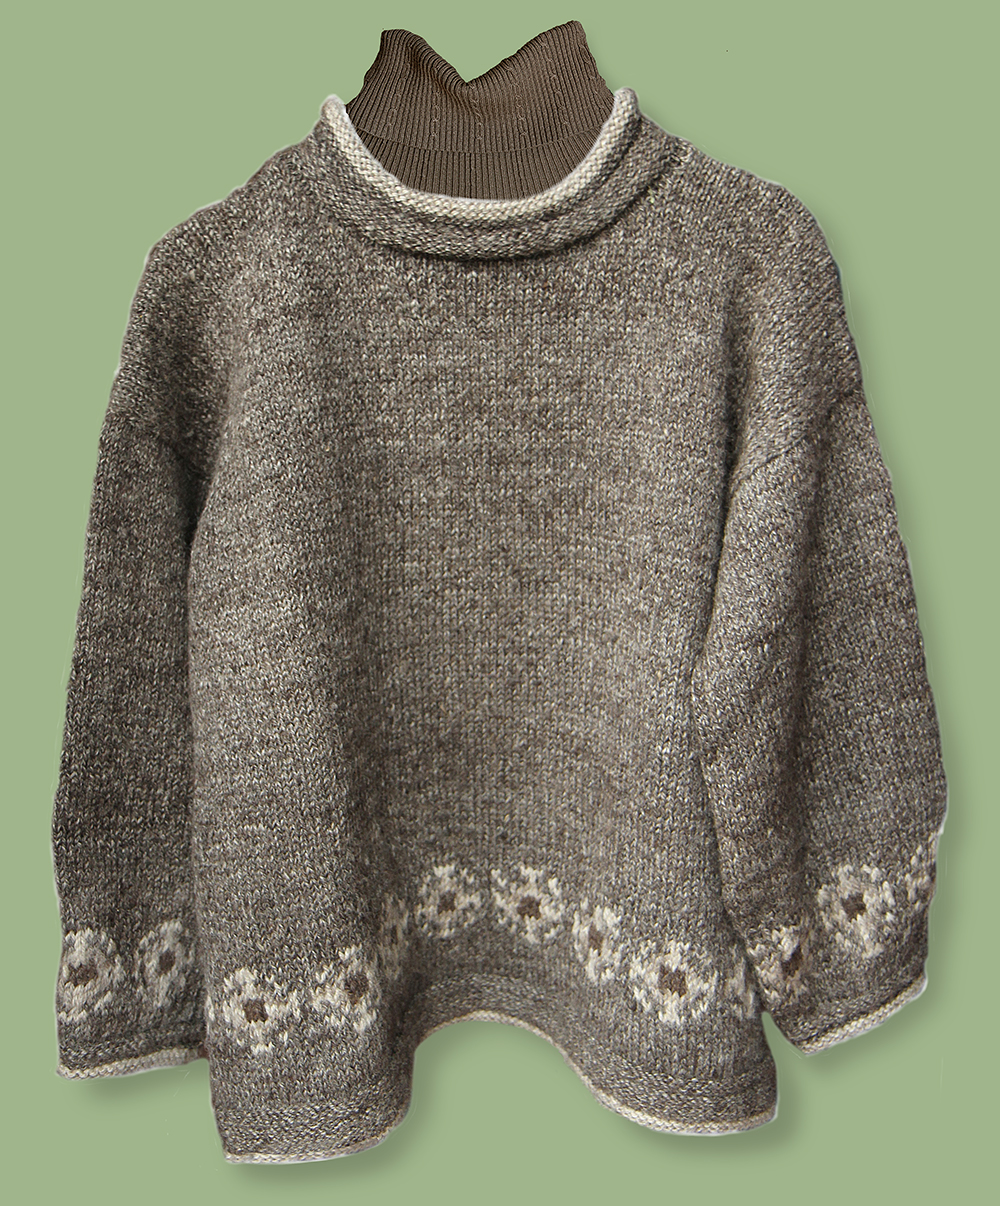 Hand knit sweater from Romney sheep wool